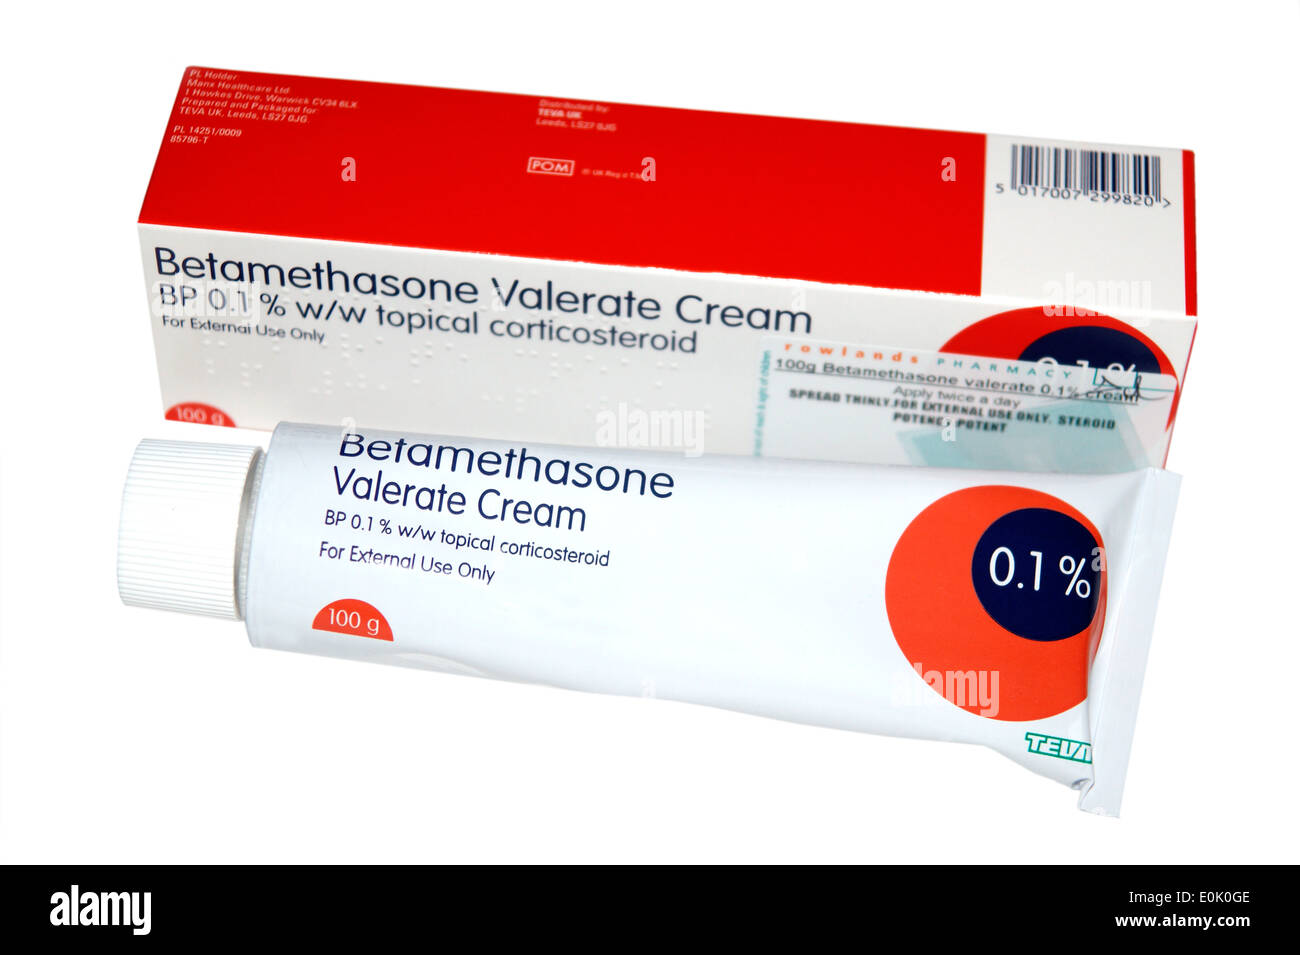 can betamethasone cream be used on the face